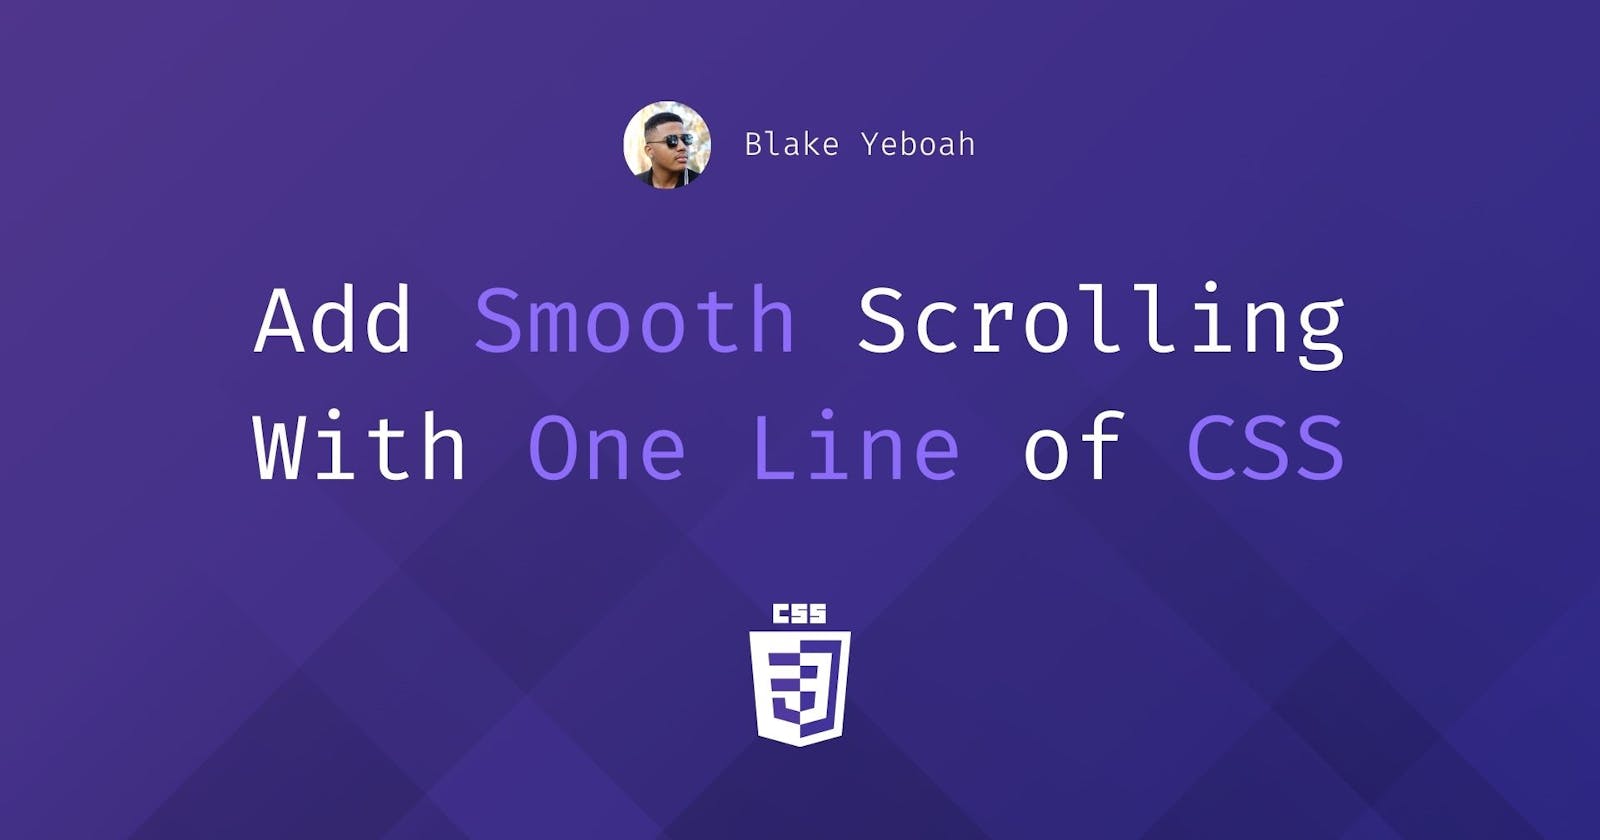 Enable Smooth Scrolling With One Line of CSS